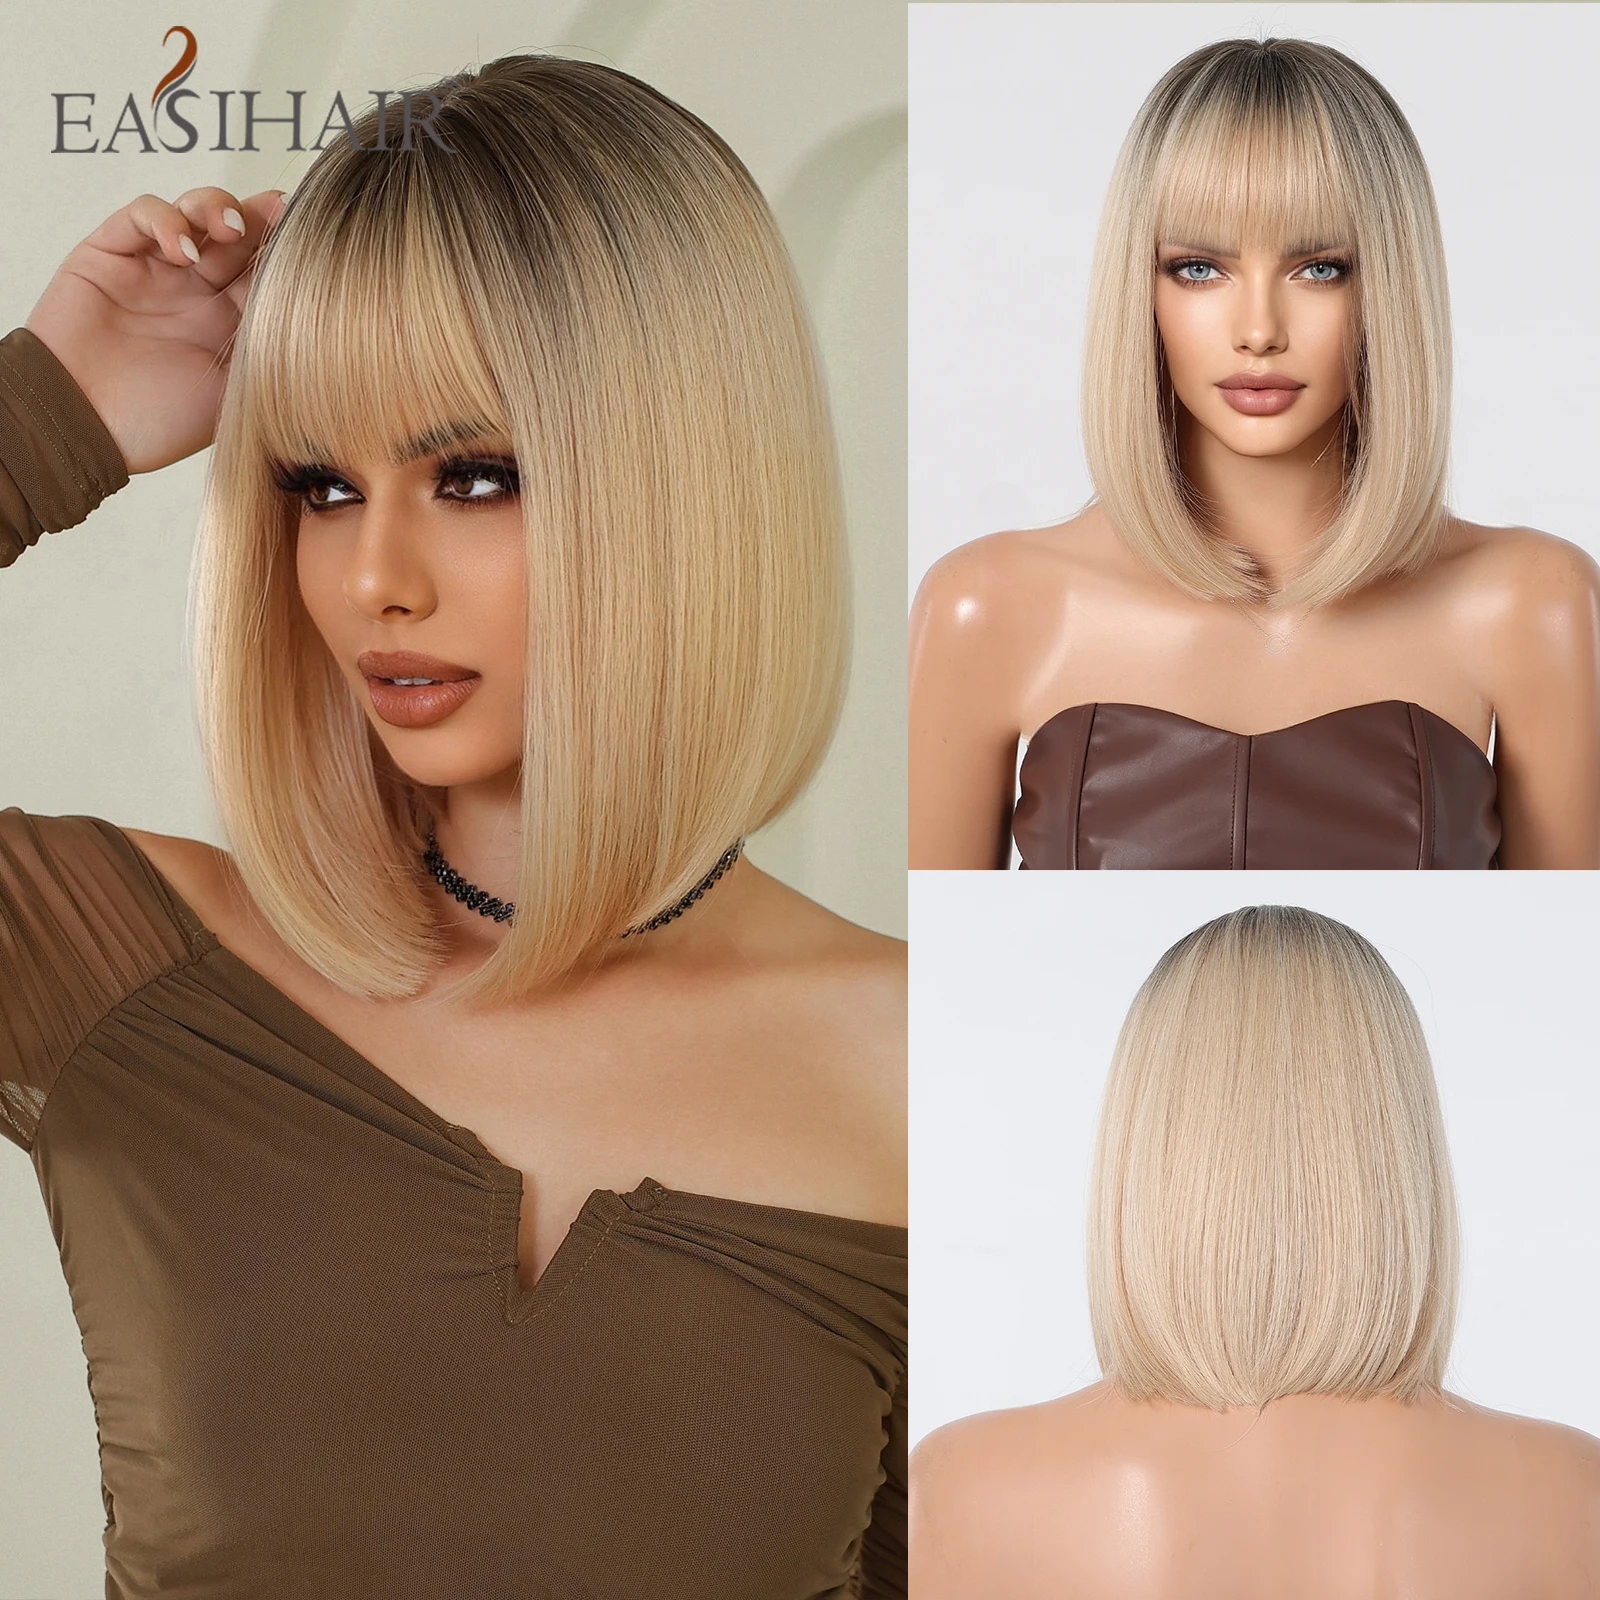 

EASIHAIR Short Straight Bob Wigs Ombre Black Blonde Natural Synthetic Hair Wig with Bangs for Women Daily Cosplay Heat Resistant